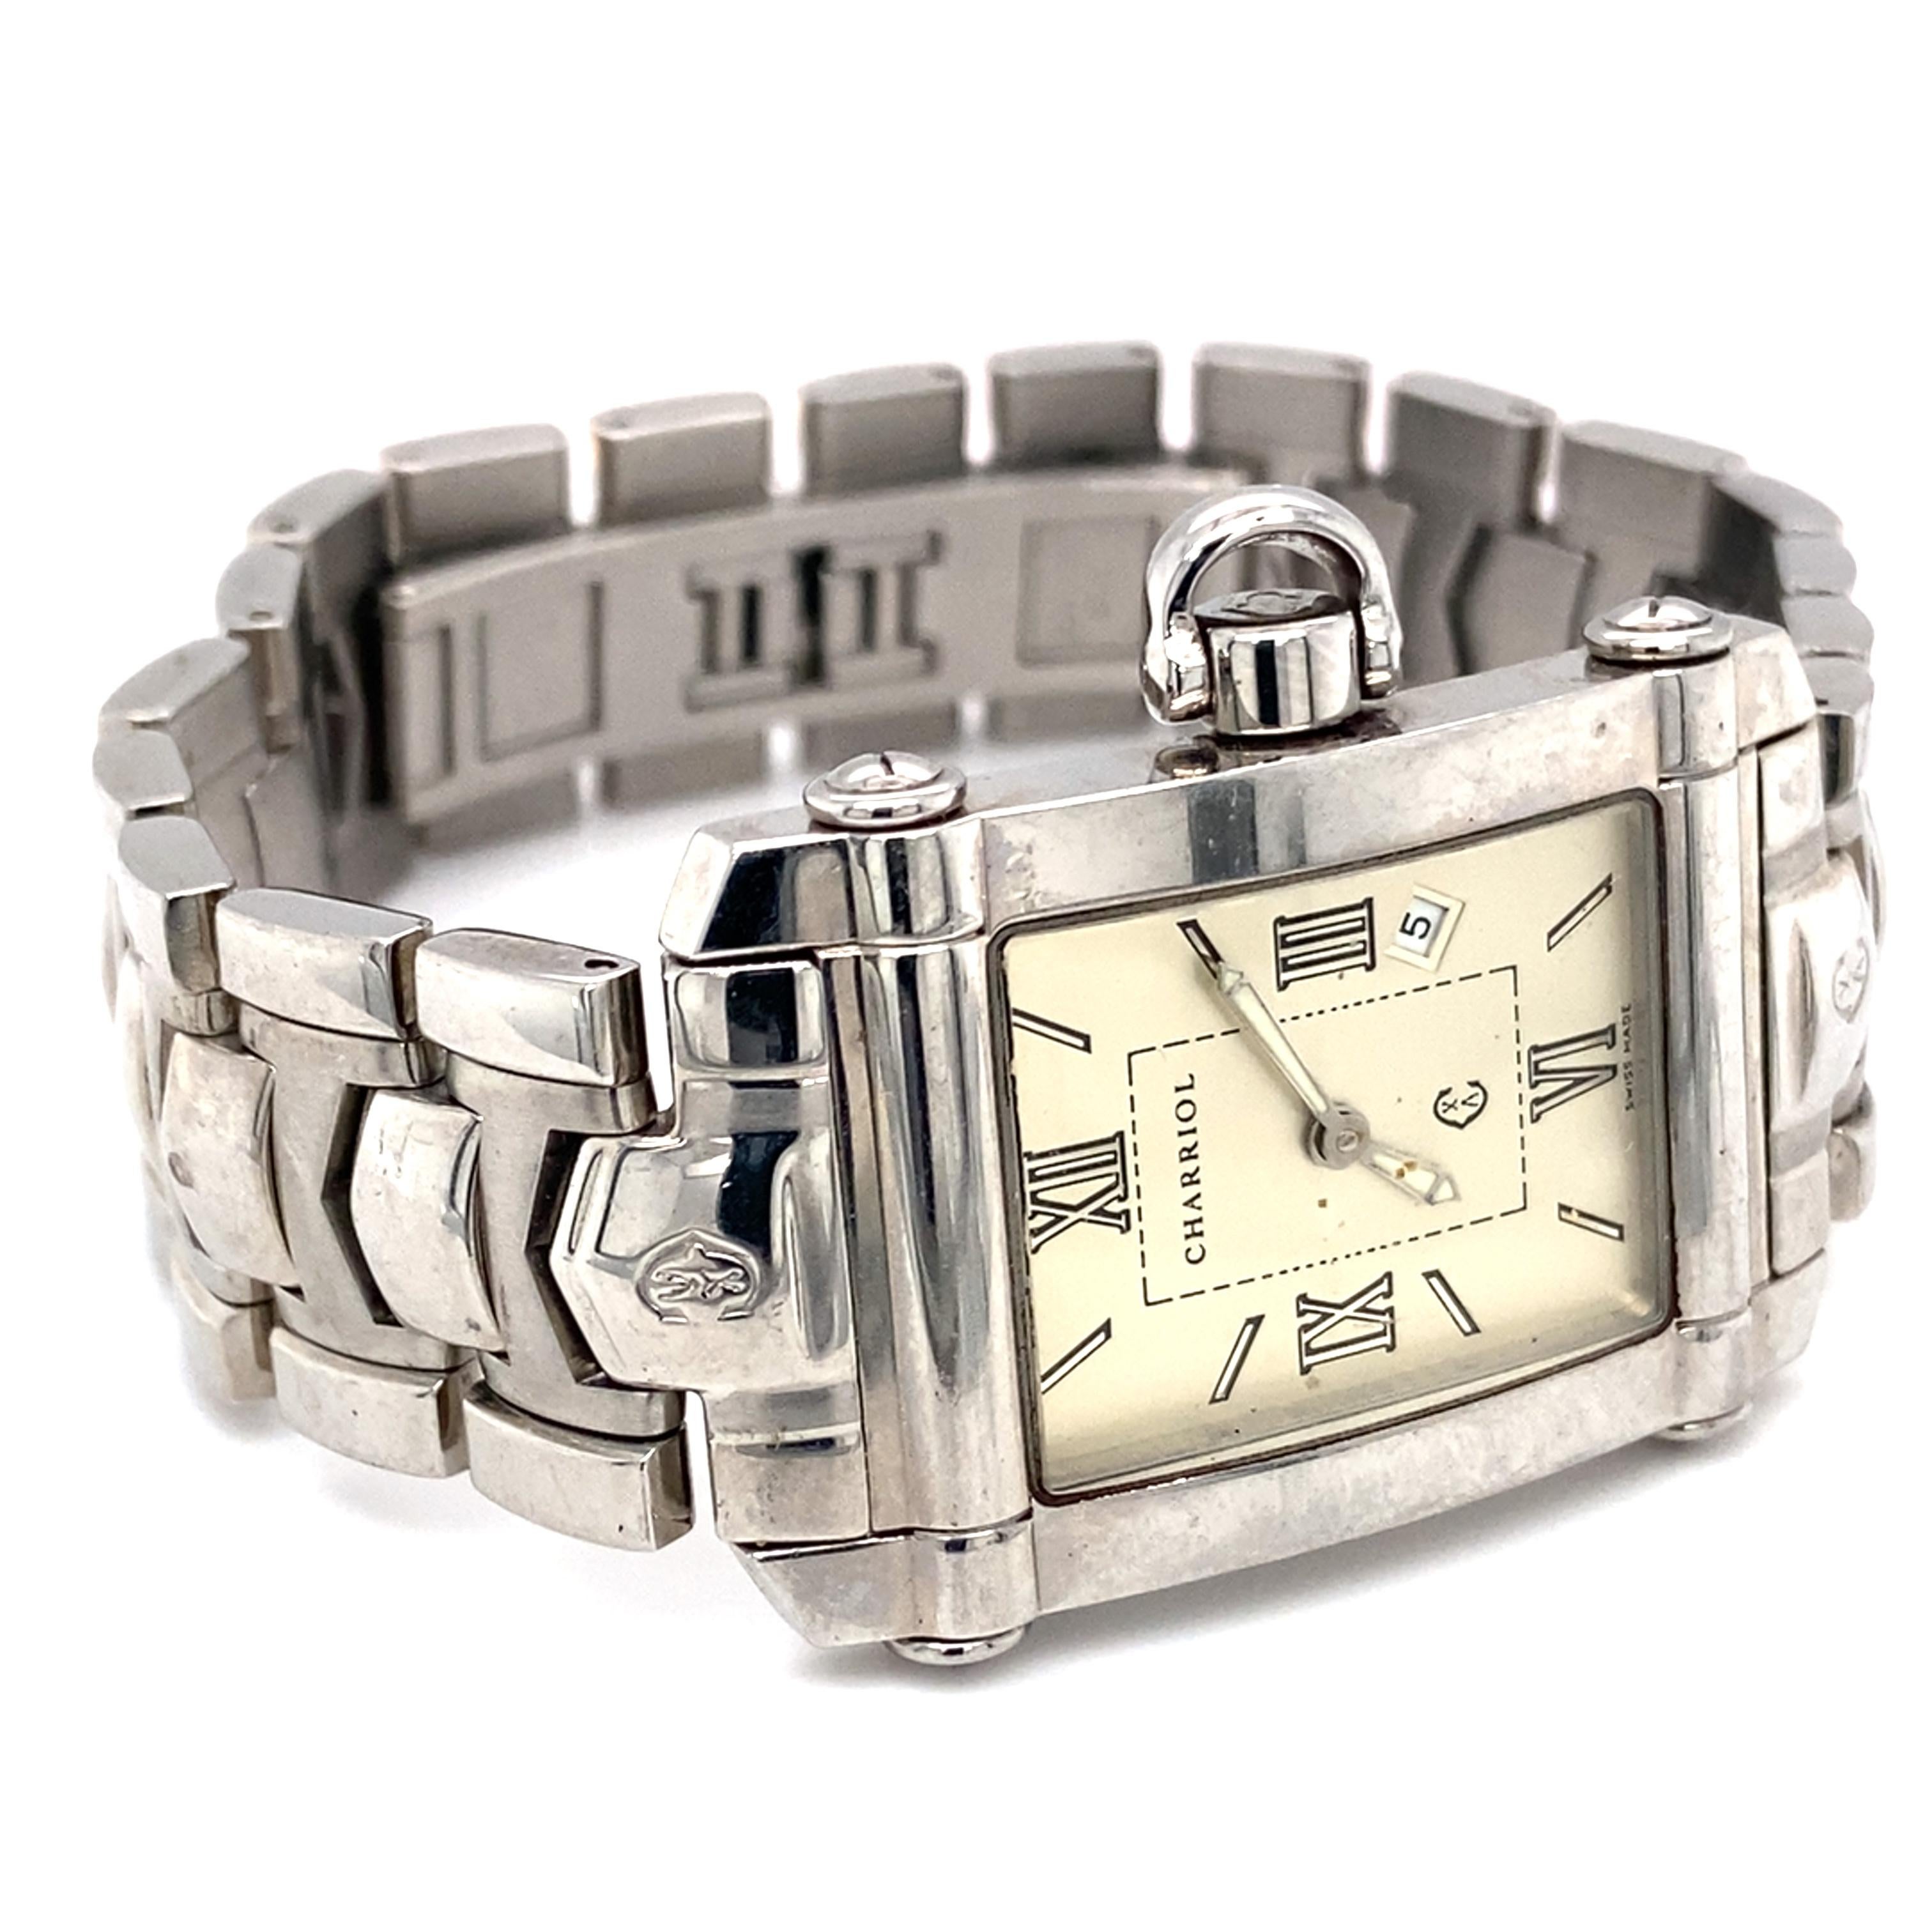 Item Details: 
Designer: Charriol
Model: Colvmbvs
Metal: Stainless Steal 
Weight: 99.1 grams 
Measurements: Fits an 8 inch wrist 
Case Size: 25mm x 30mm 

Item Features: This stunning modern watch has a cream color dial with a date wheel that